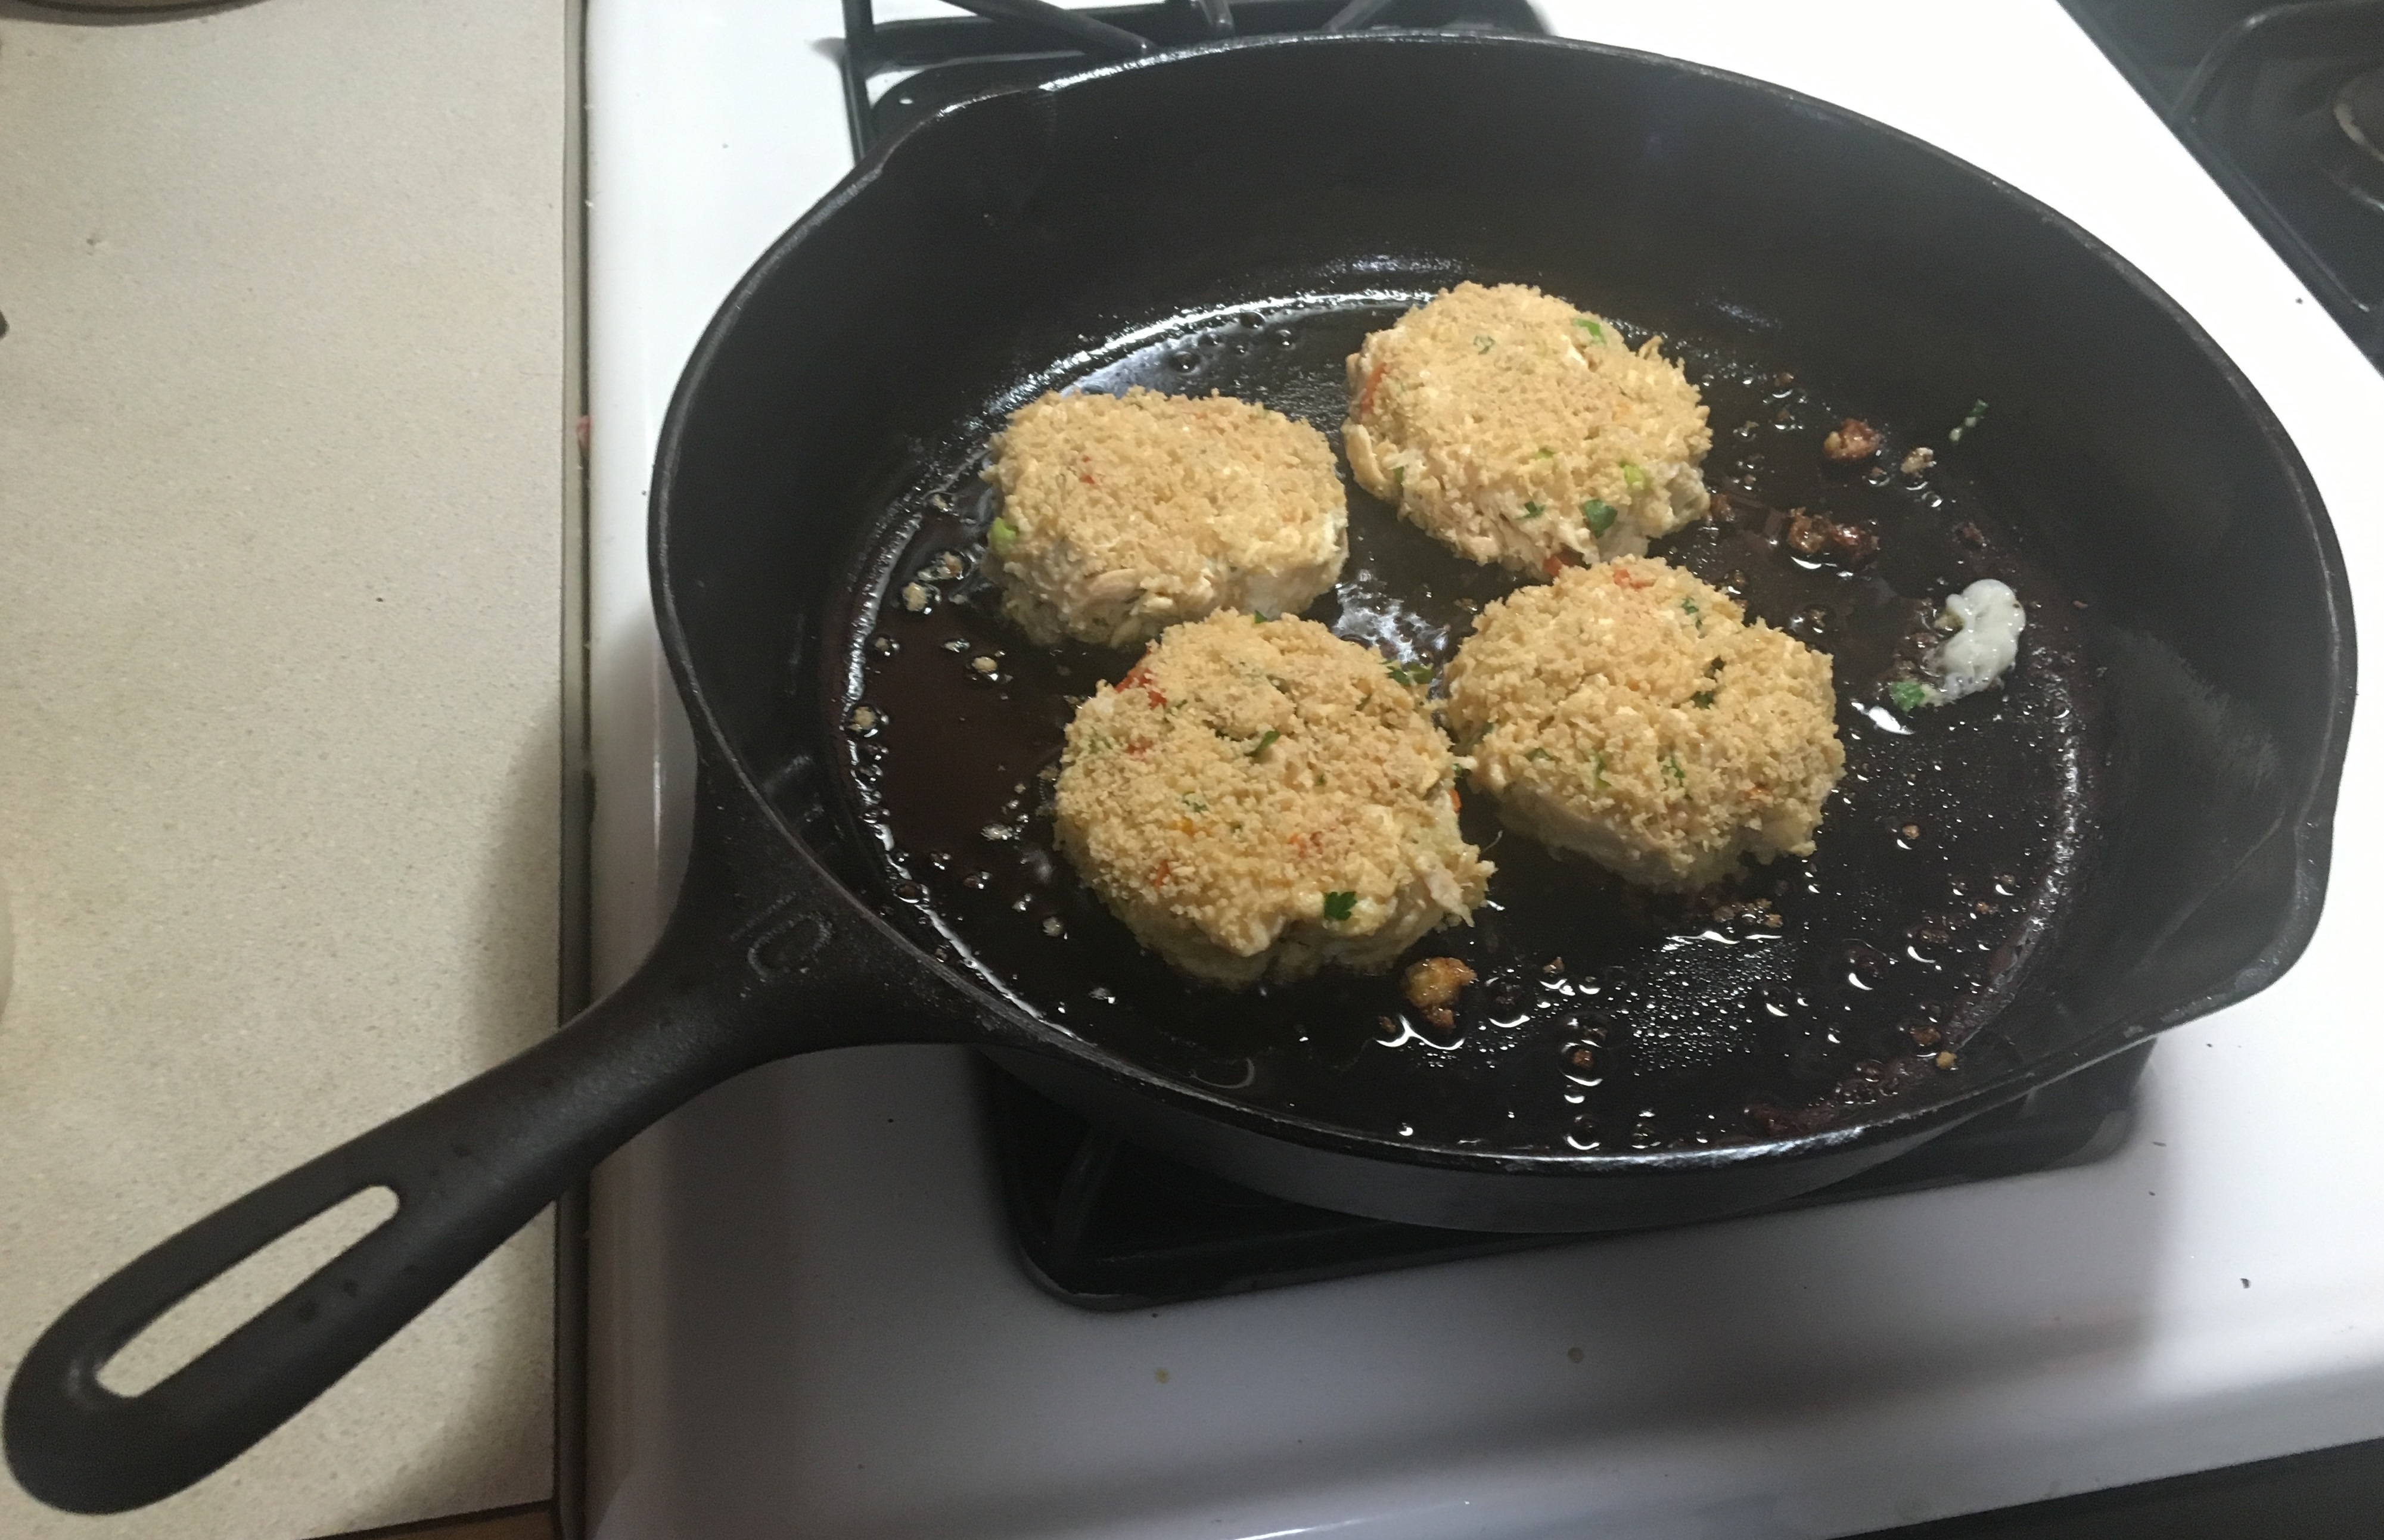 Four breaded lake trout cakes cooking in a cast-iron skillet